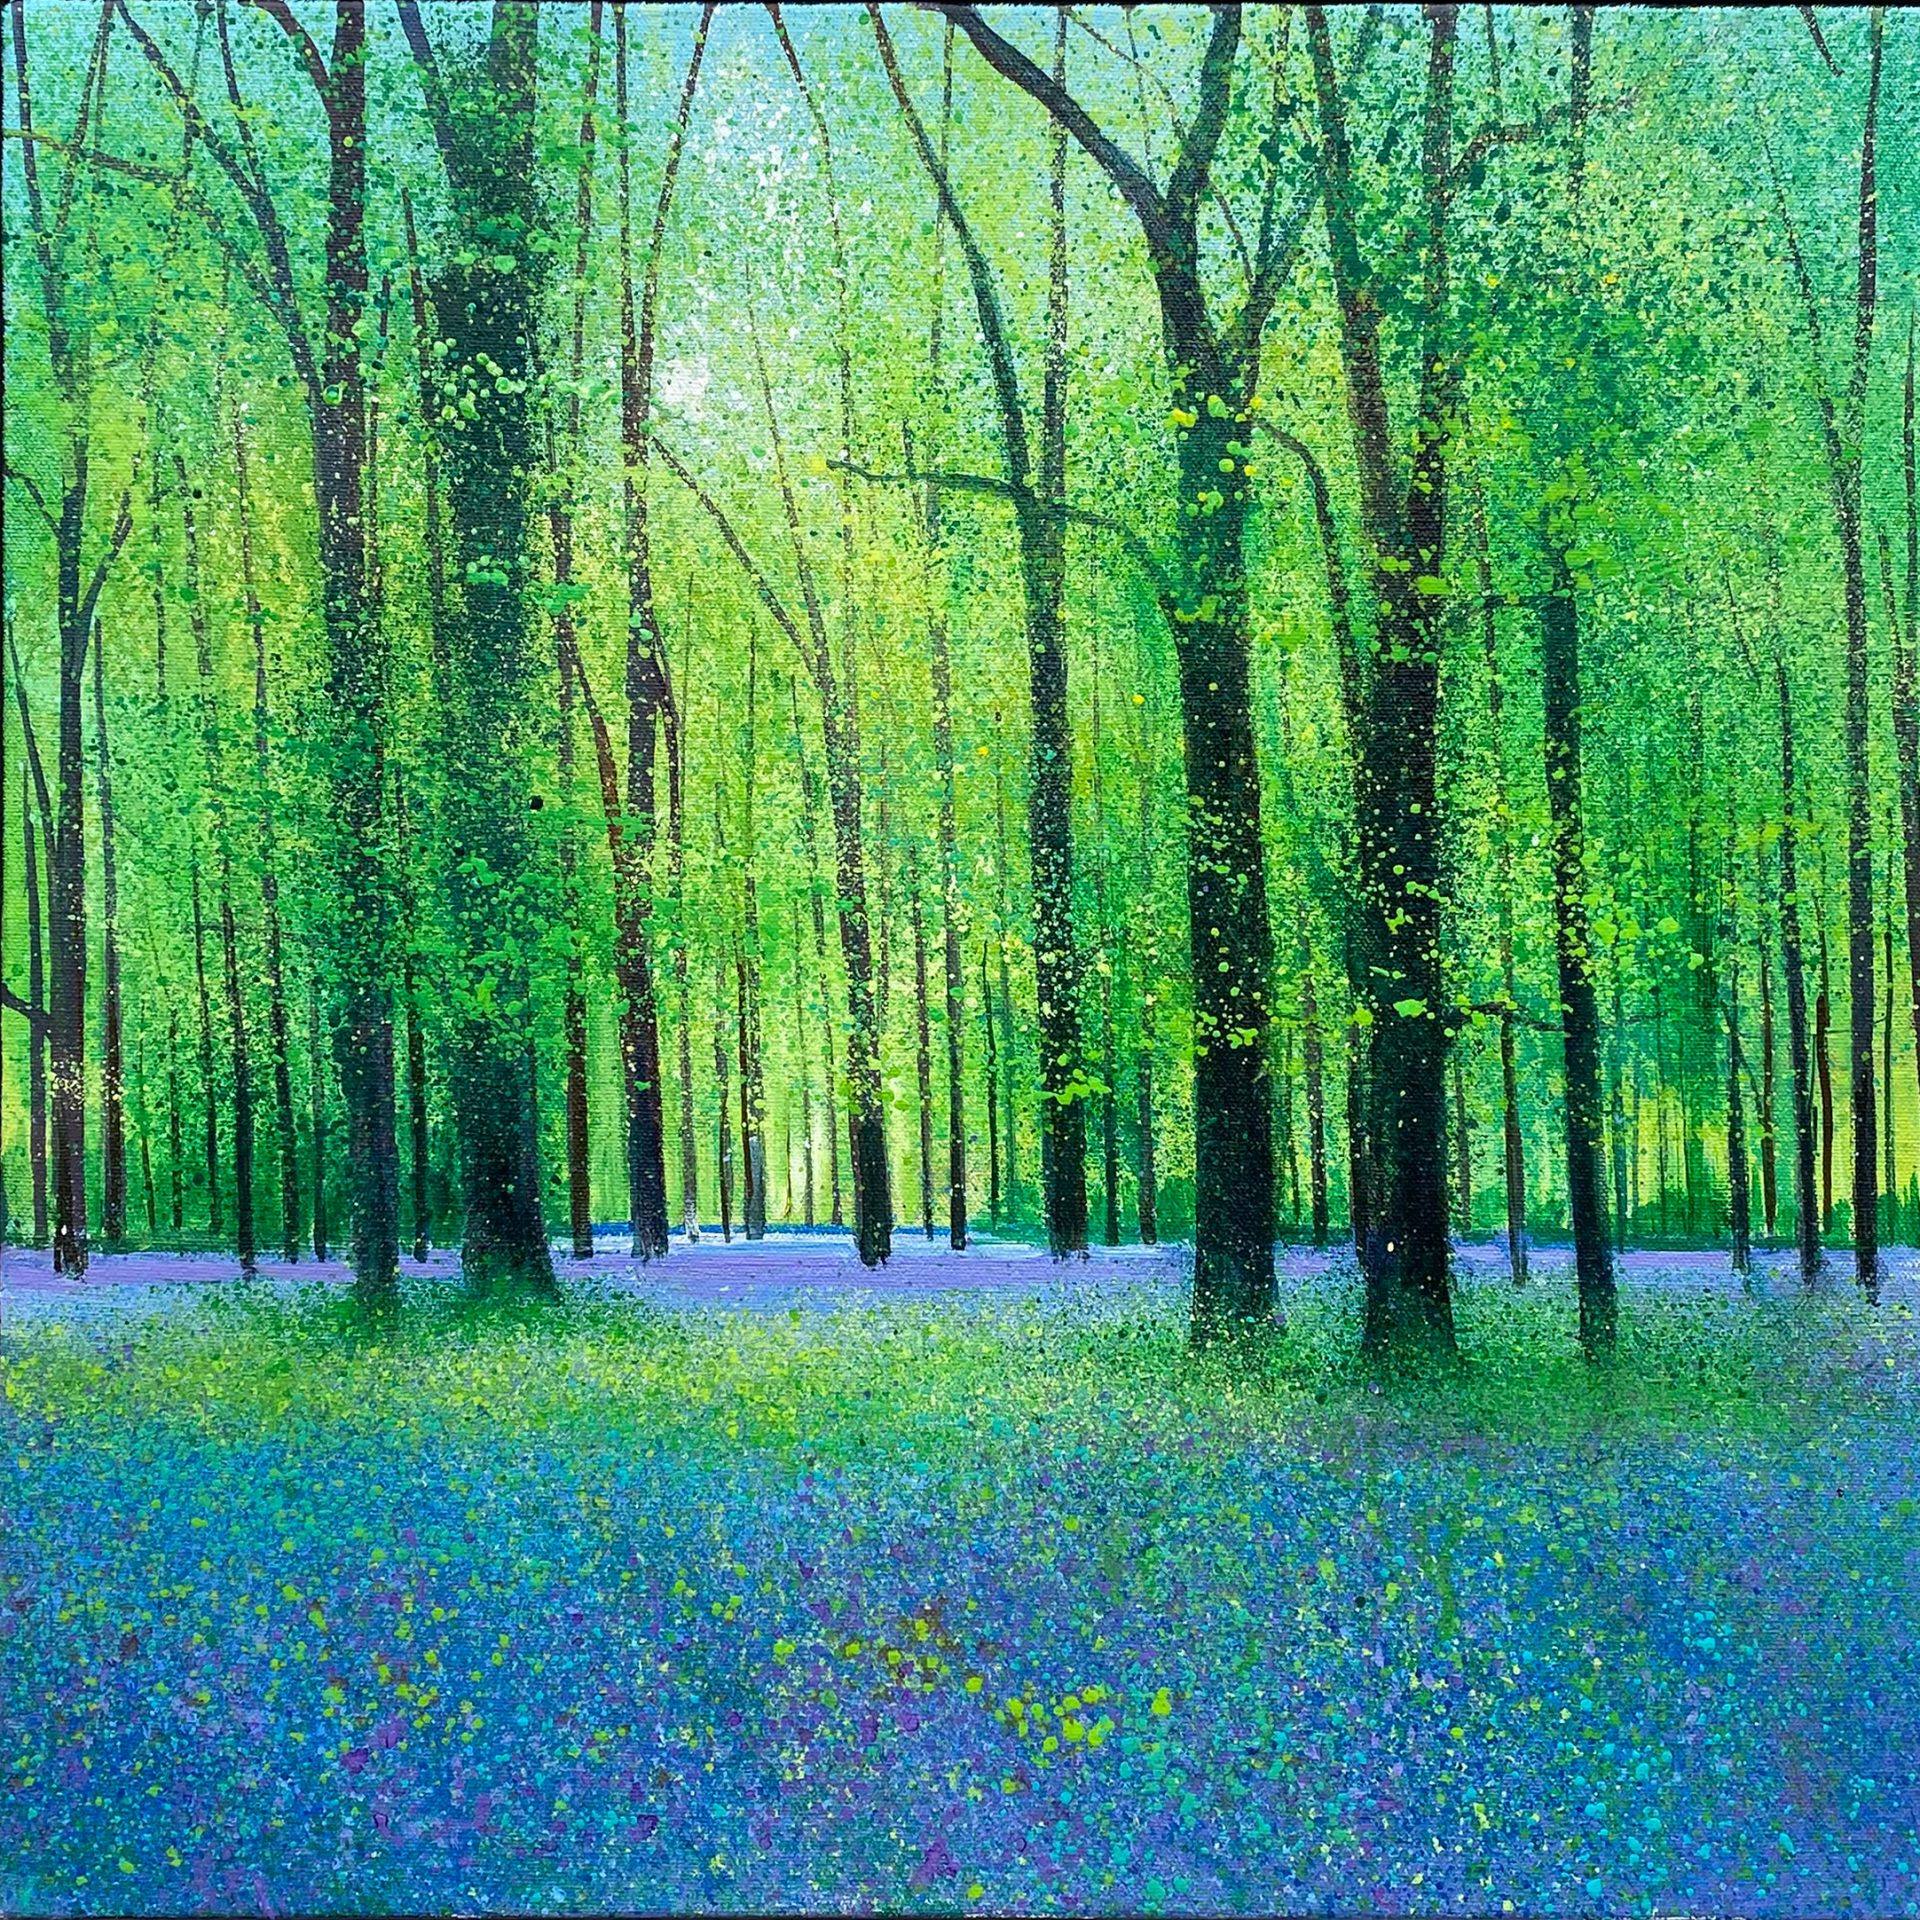 John Connolly Strolling Through The Blues art unique original painting art gift of Spring bluebell woodlands painting framed in modern style